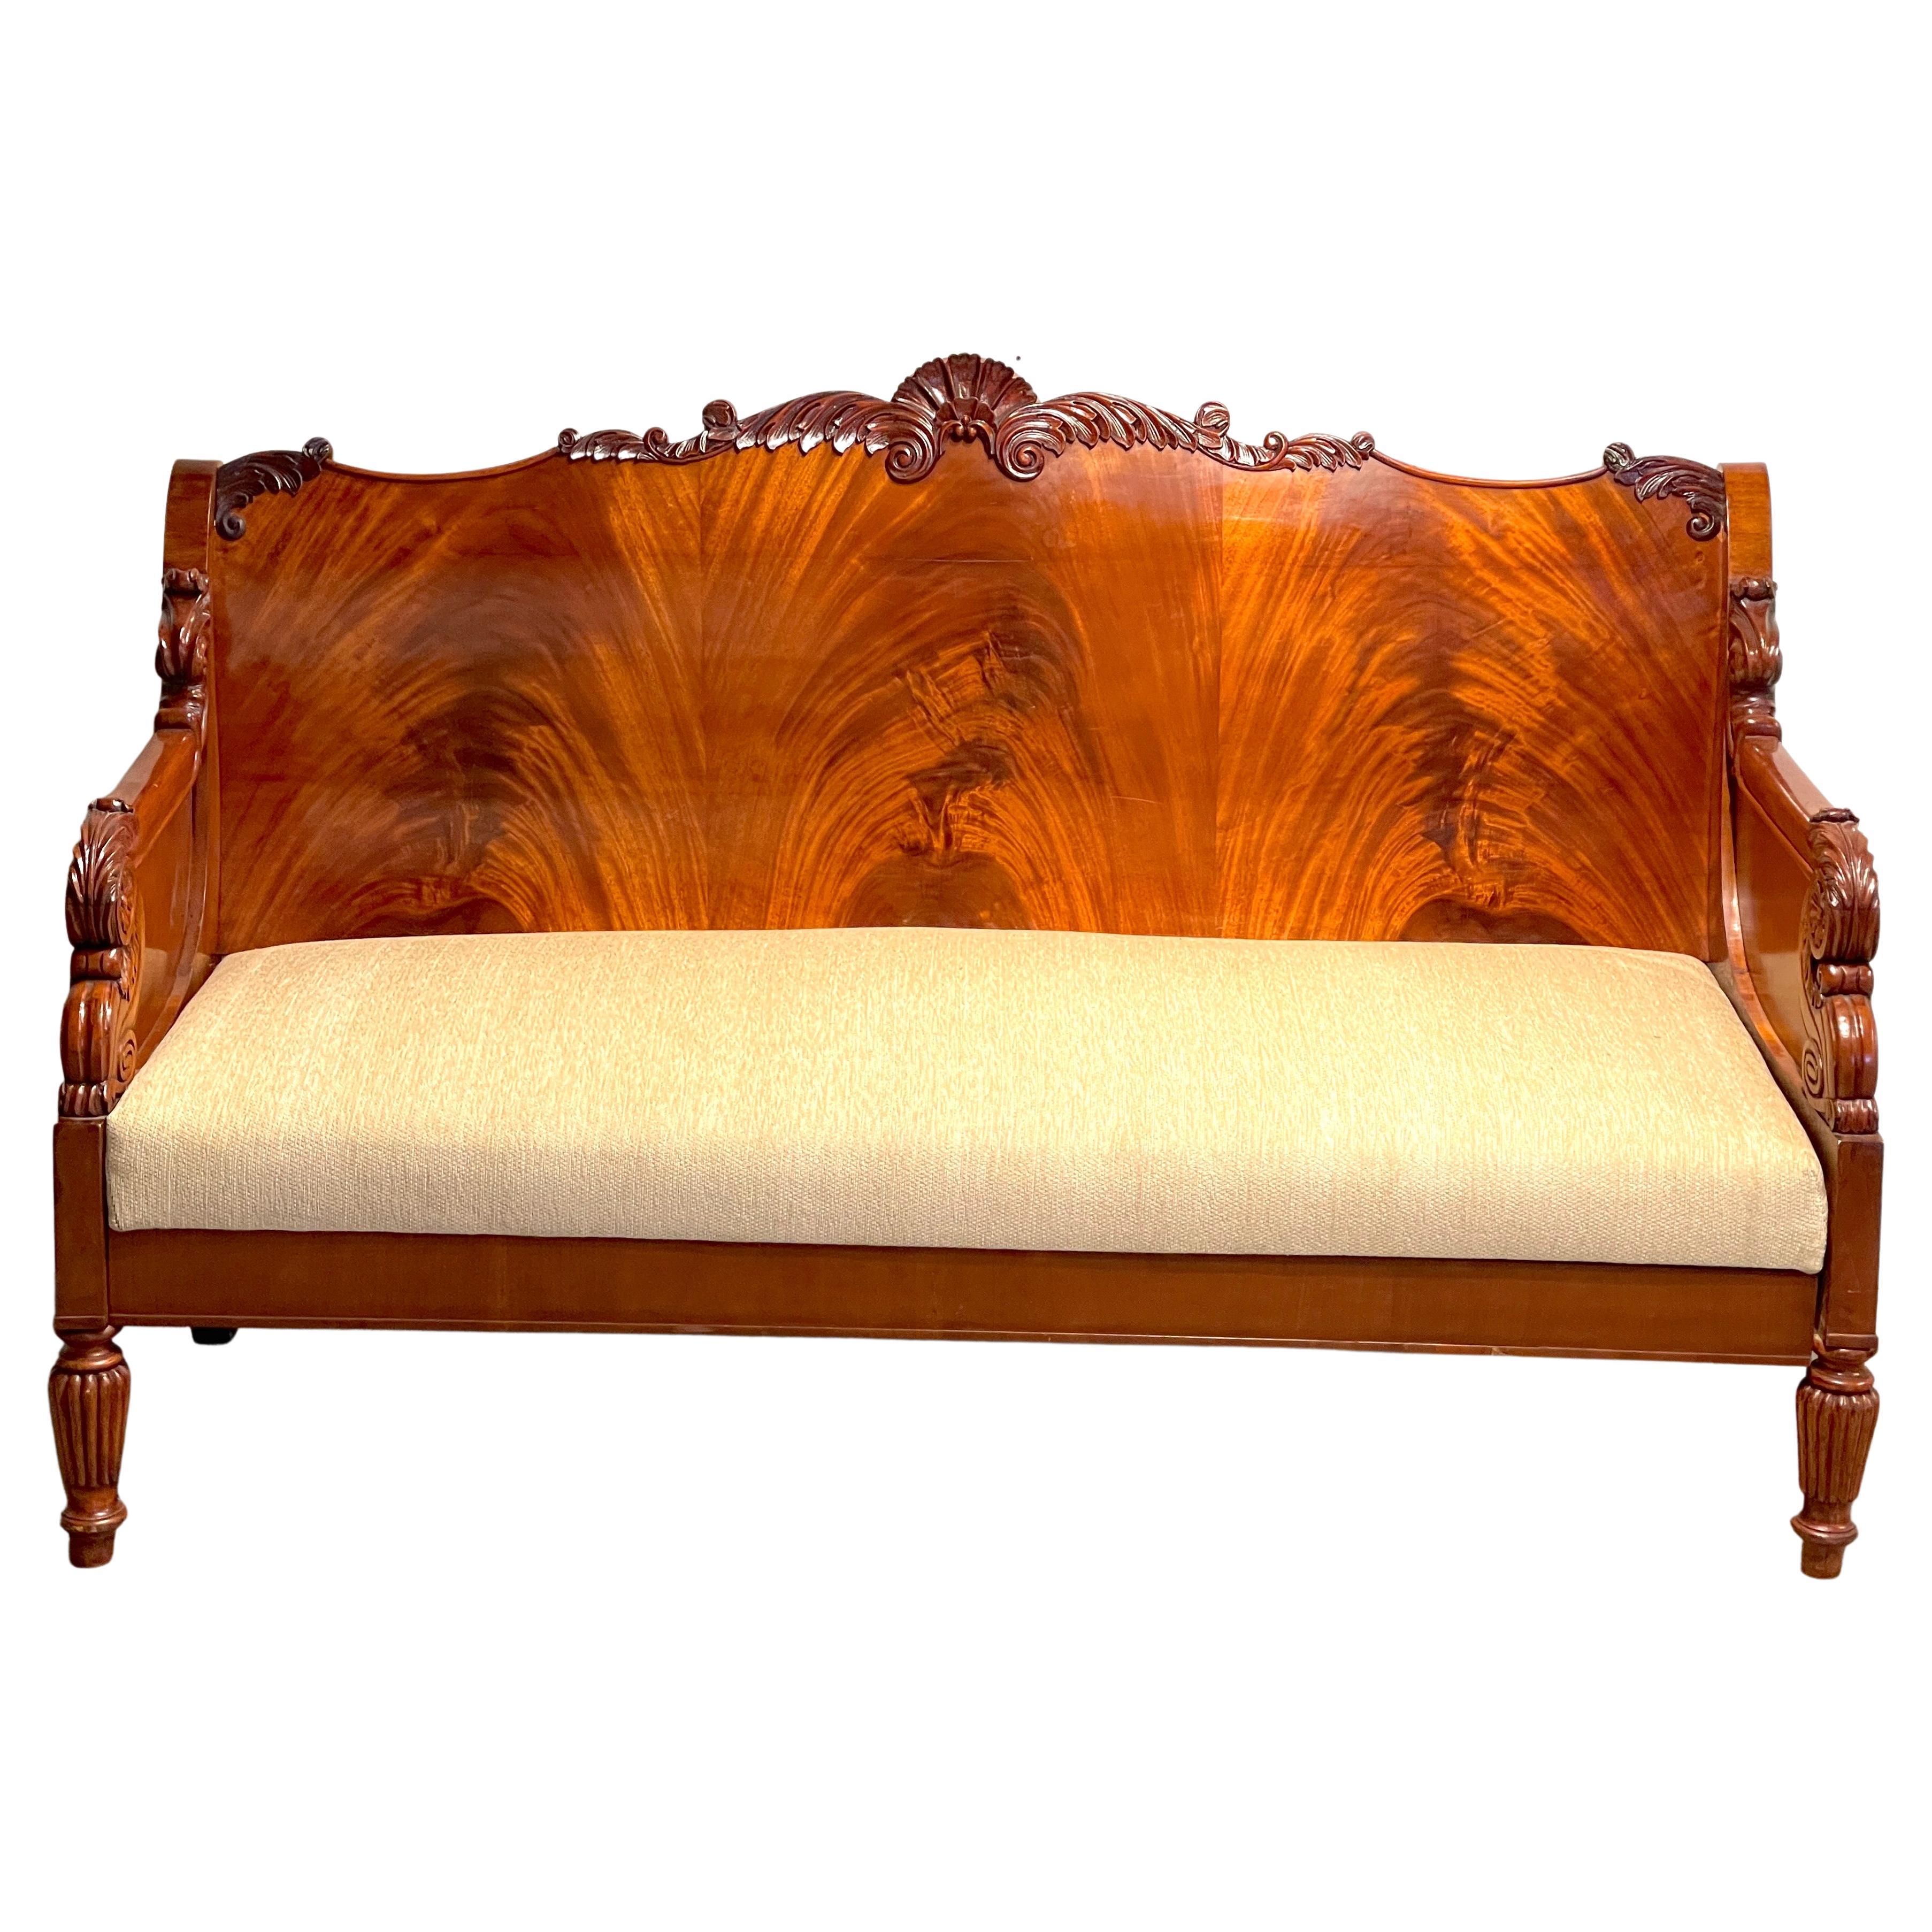 19th Century Russian Neoclassical Flame Mahogany Sofa  For Sale